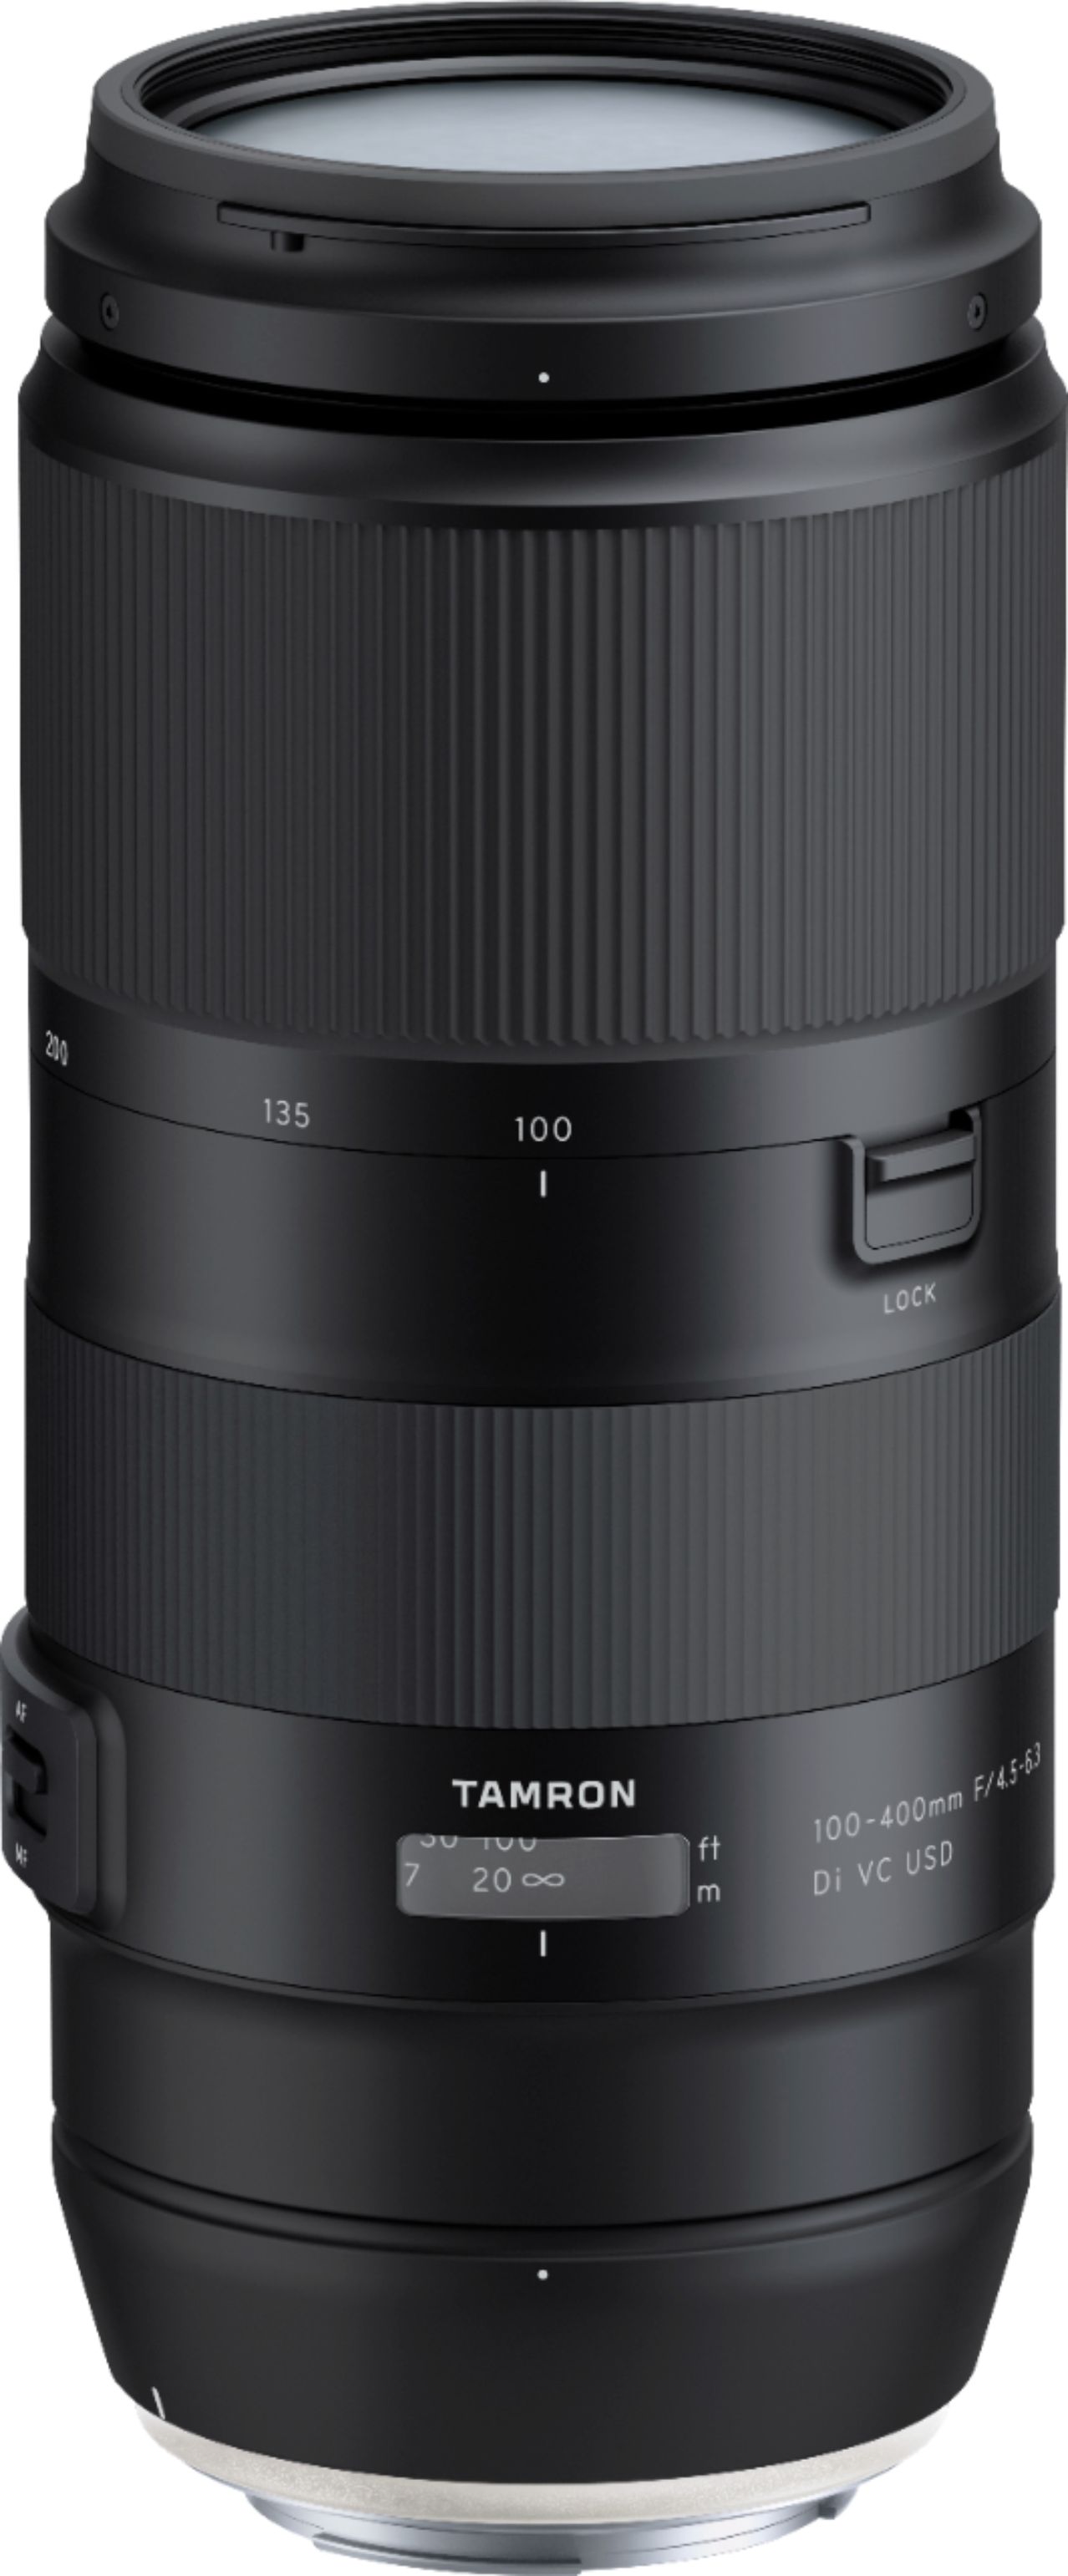 Tamron 100-400mm F/4.5-6.3 Di VC USD Telephoto Zoom Lens for